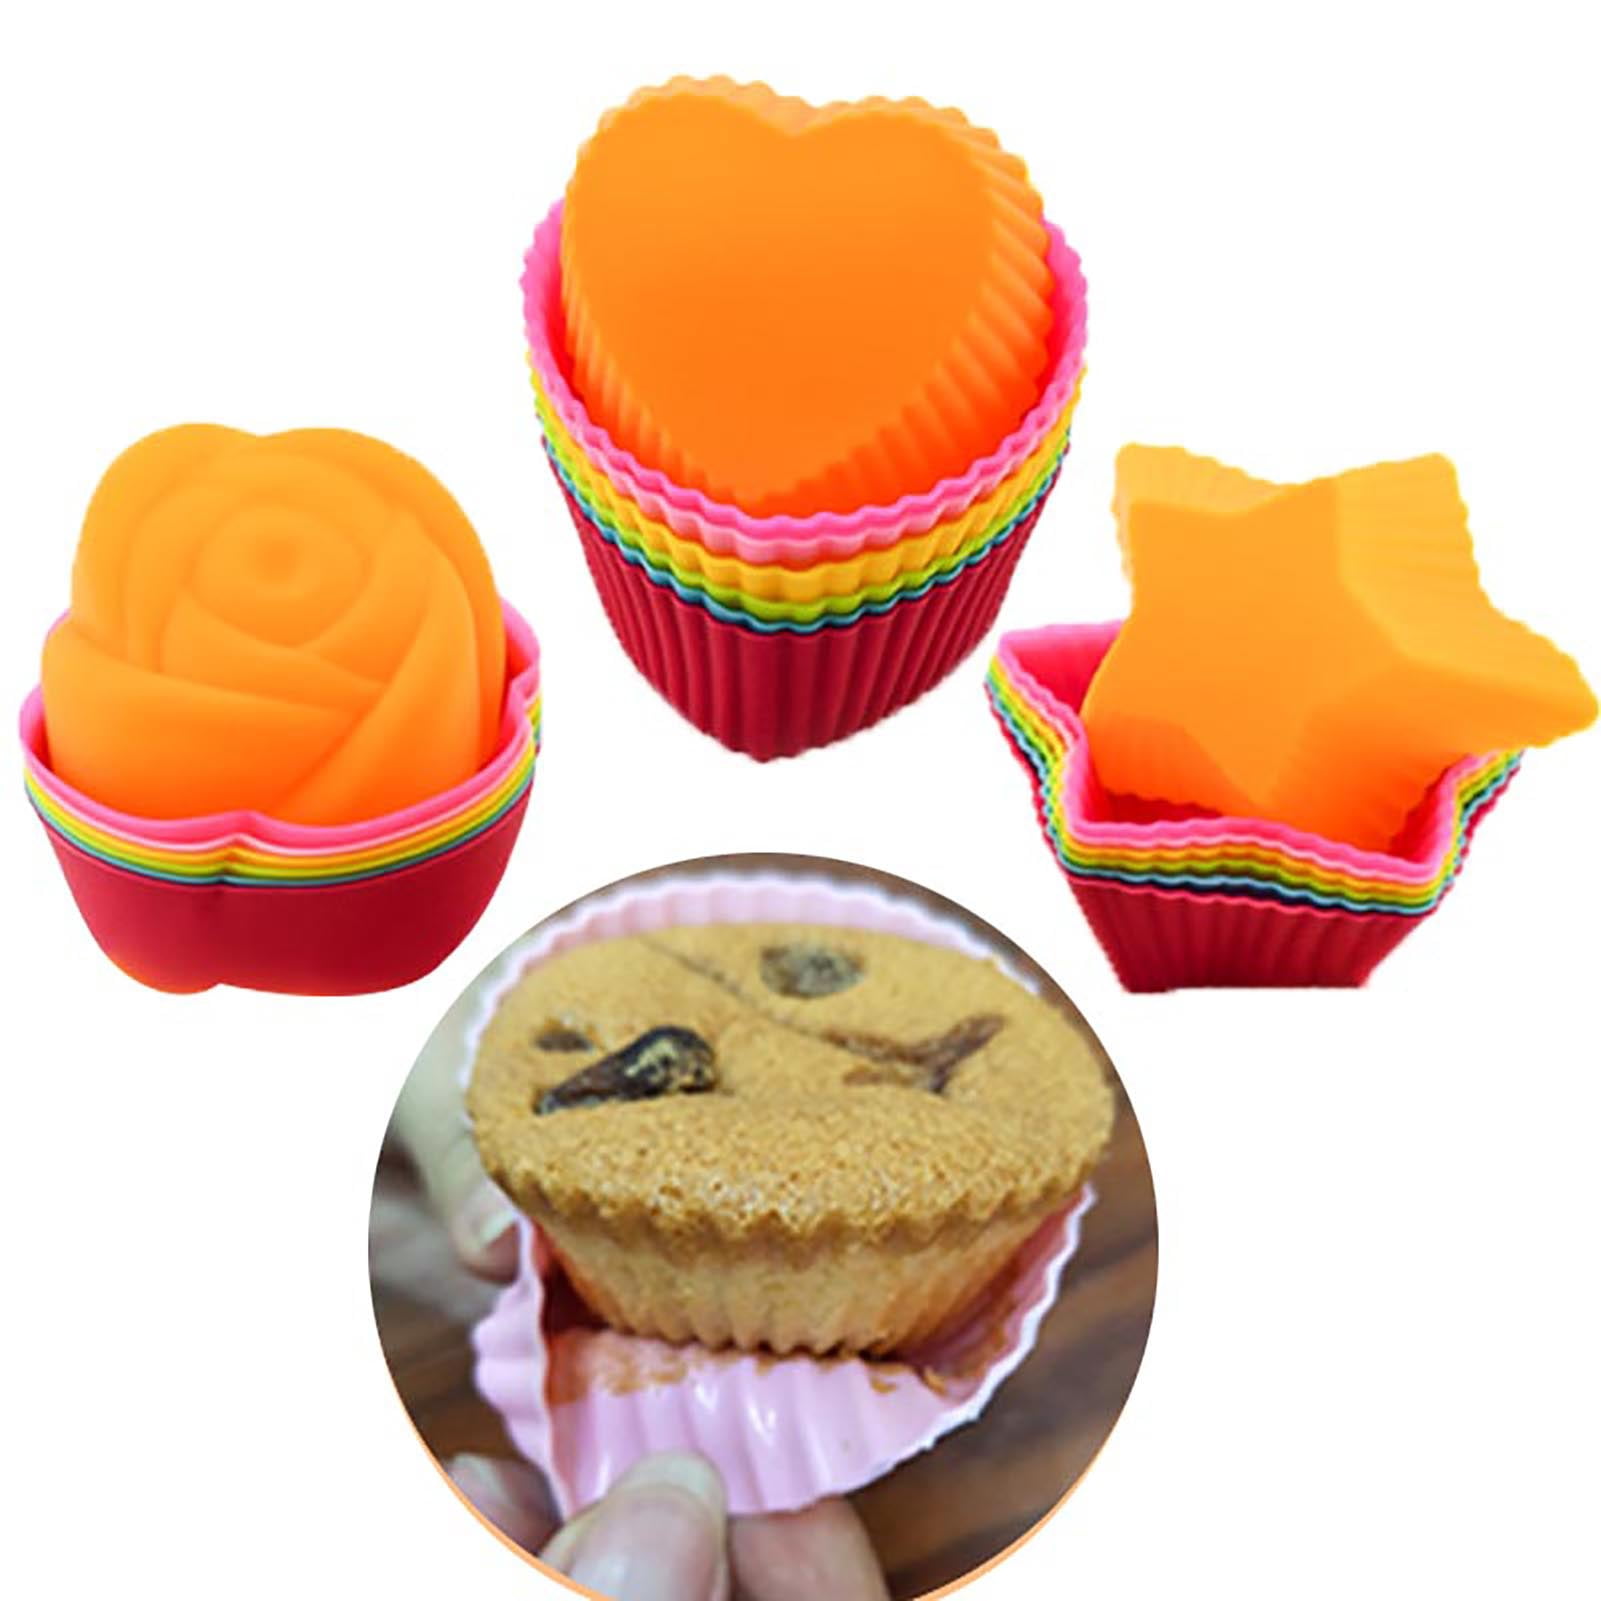 12 pcs Home Kitchen Use Silicone Cake Muffin Chocolate Cupcake Liner Baking Cup Cookie Mold Cupcake Baking Cake Mold